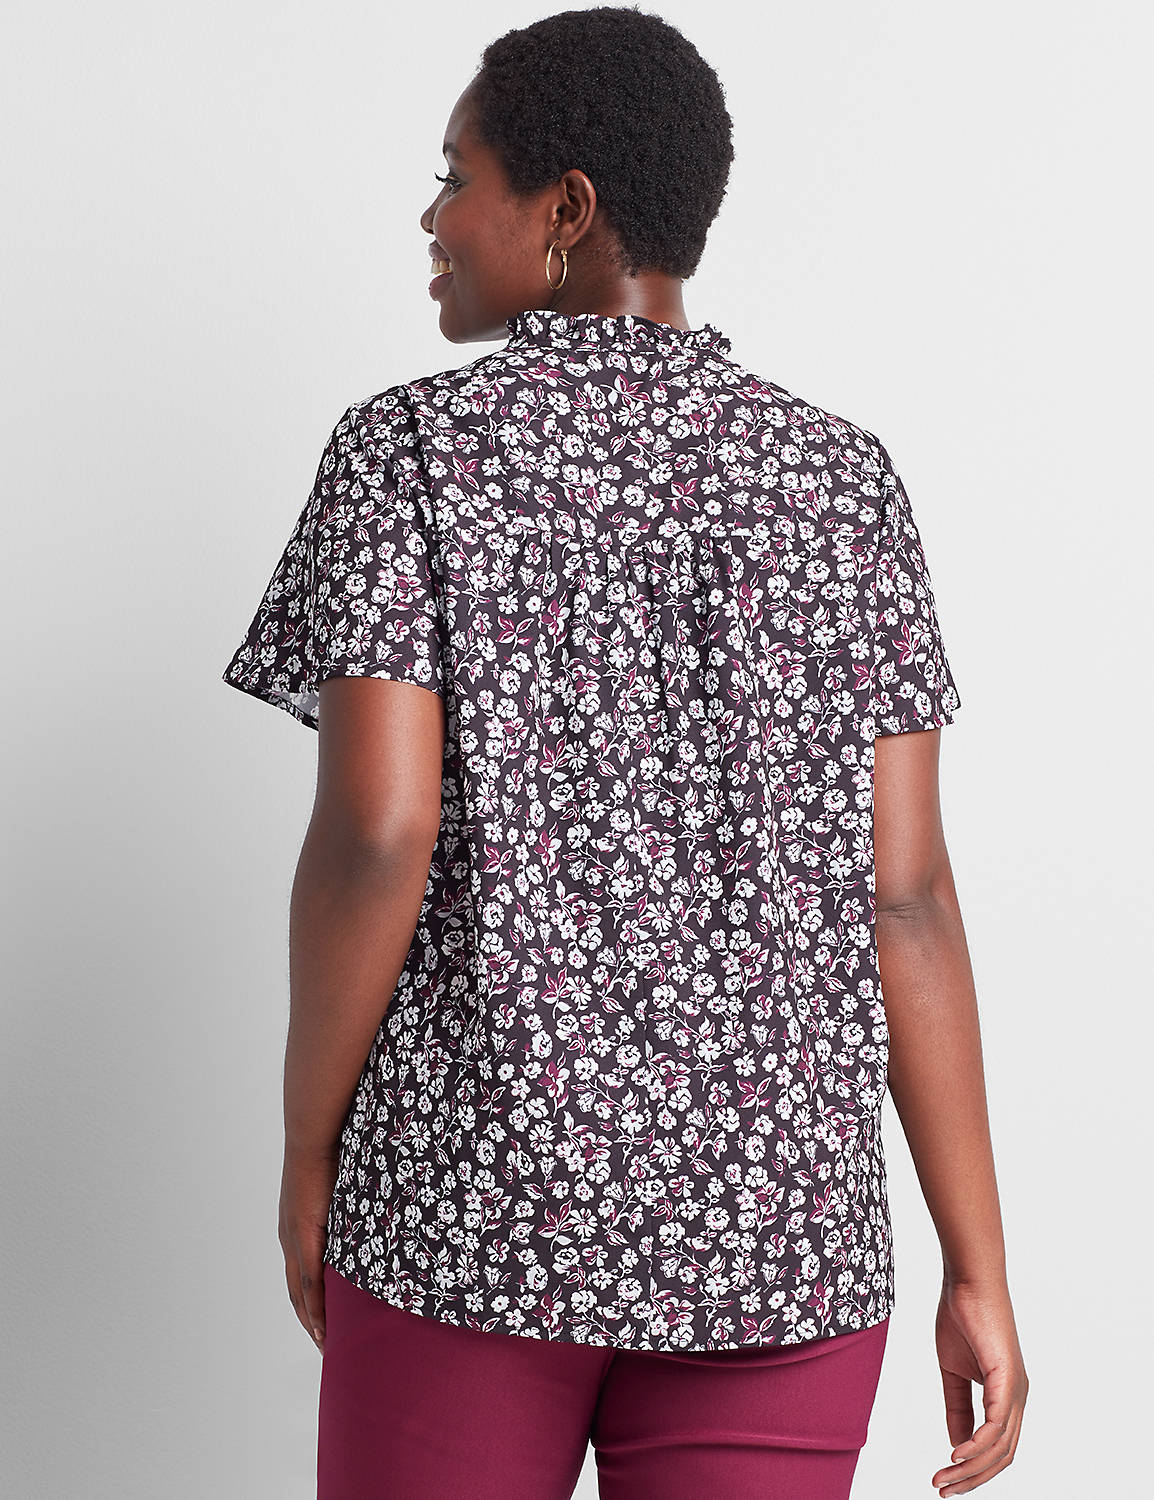 Short Sleeve Flutter Vneck with Ties Top 1113918:LBF20191_FranFloral_colorway3:12 Product Image 2